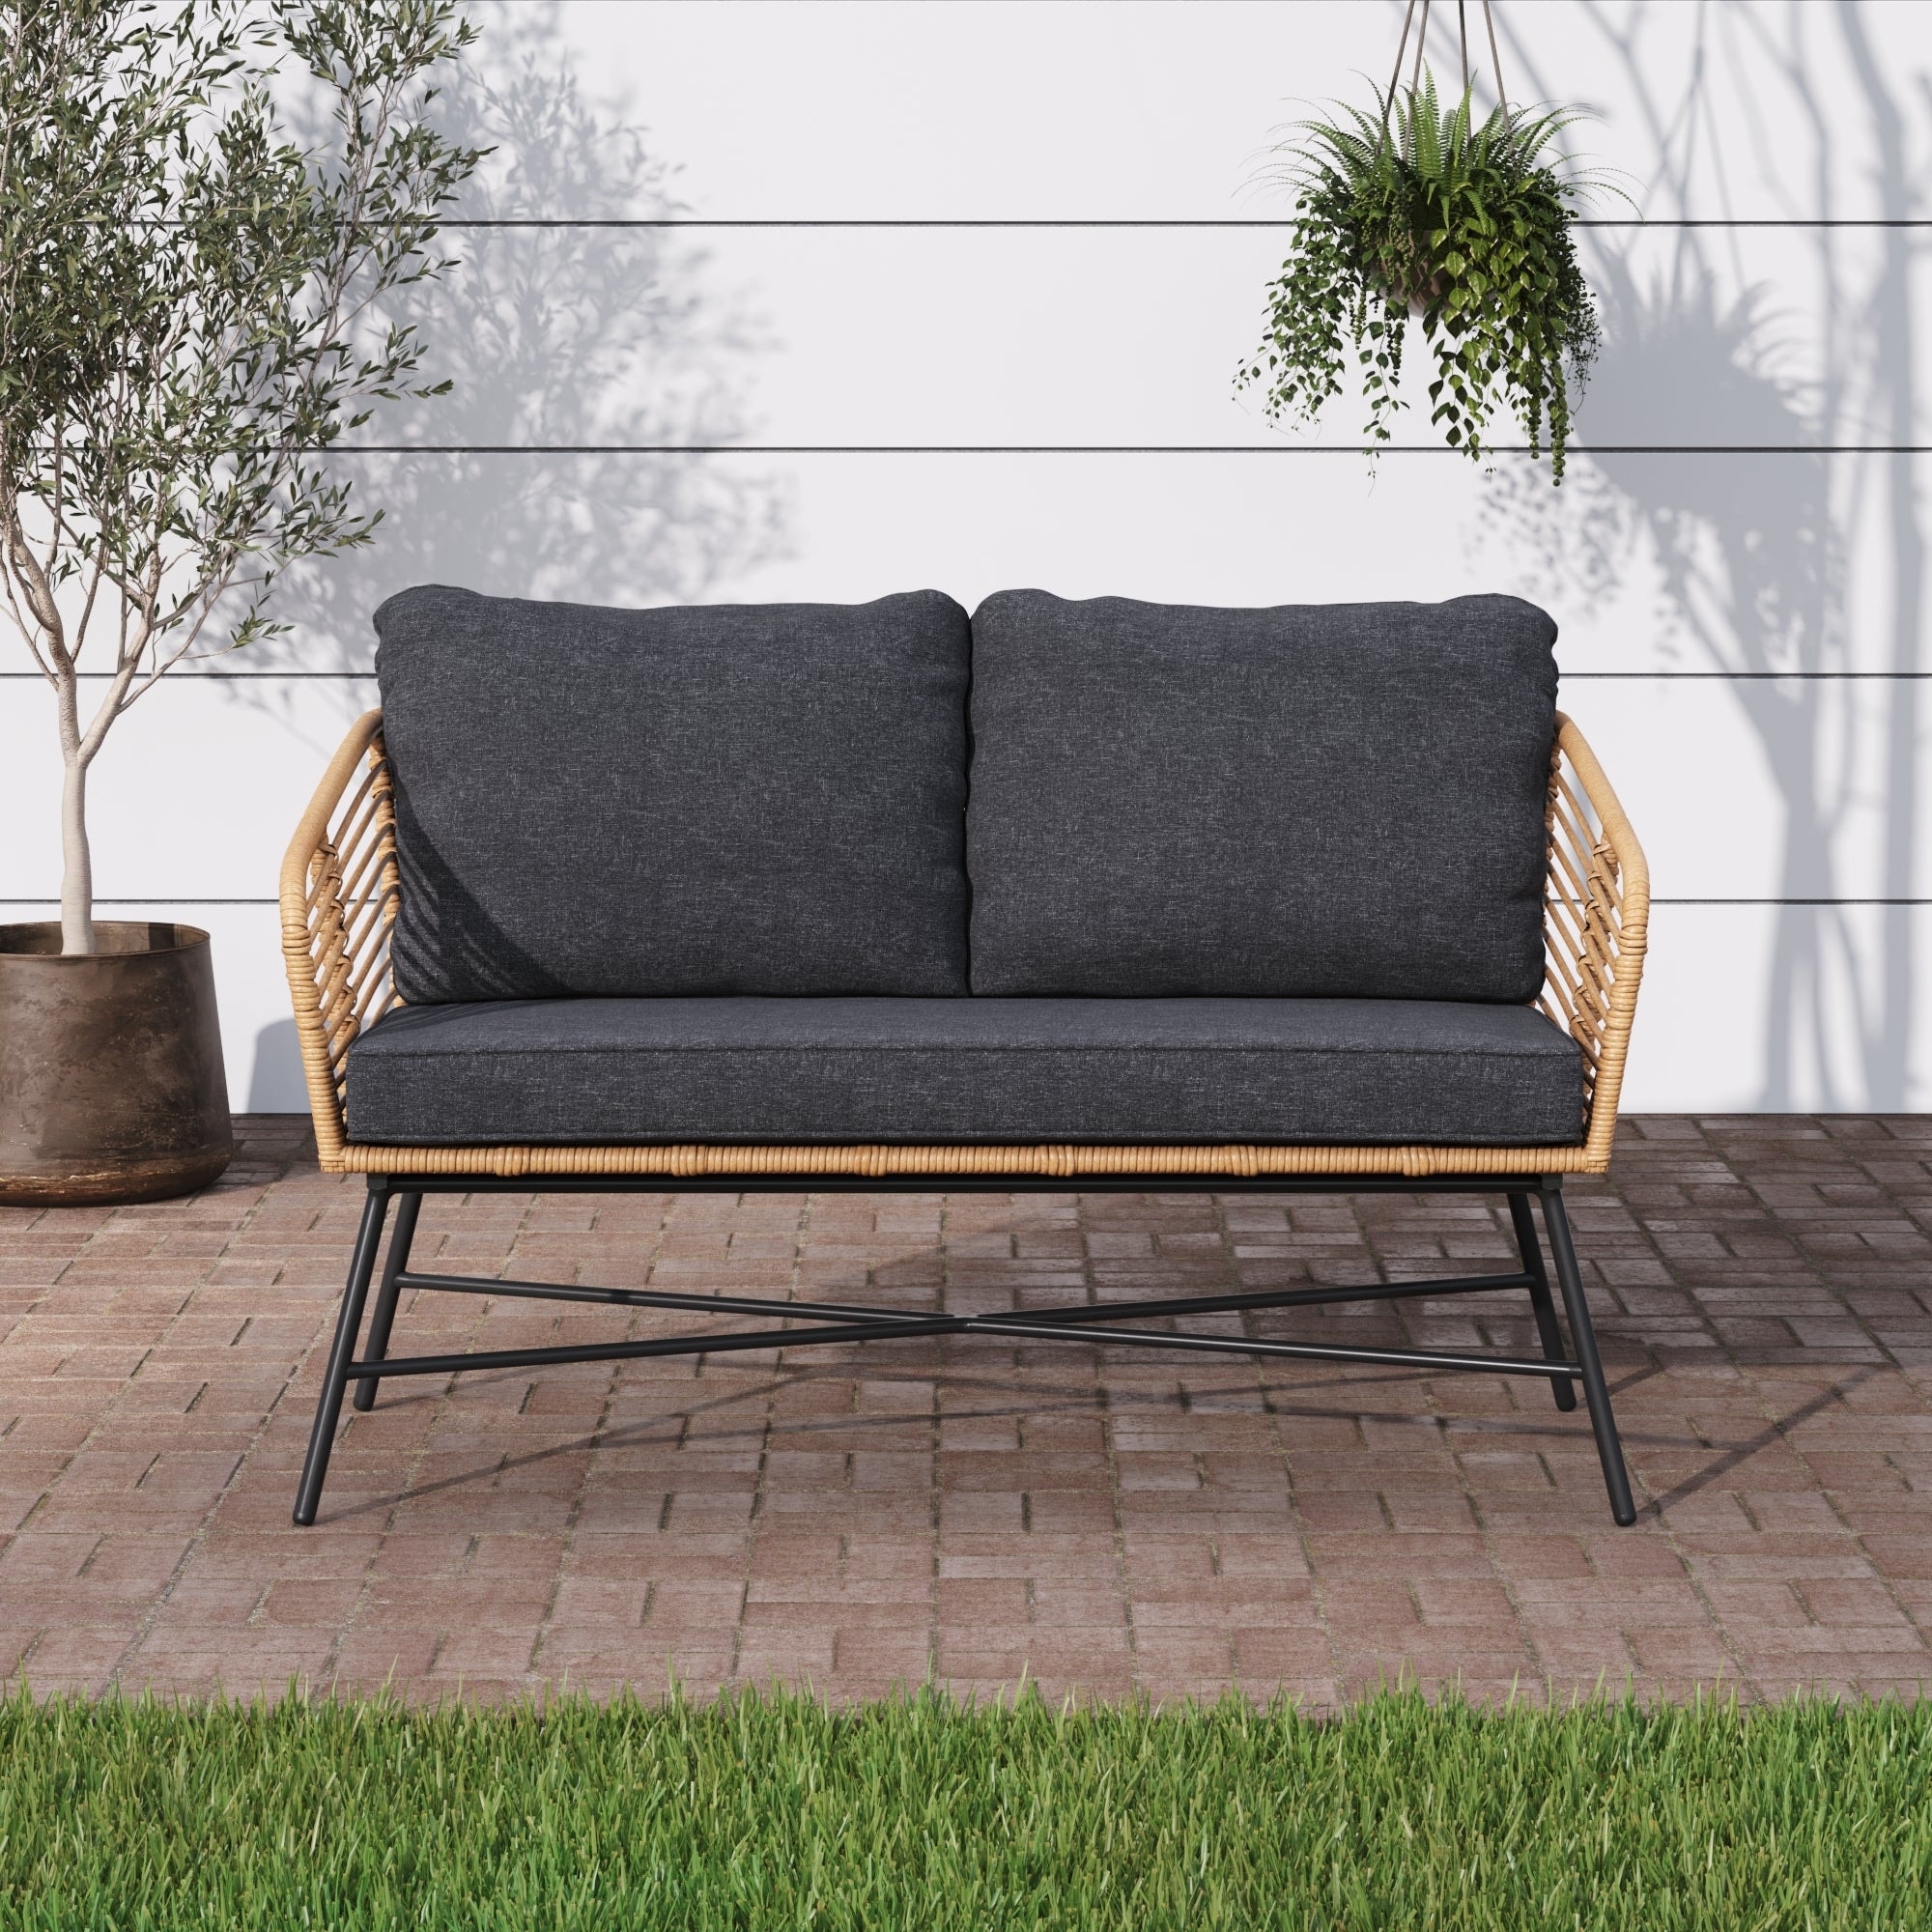 Flow Bohemian Rattan Wicker Loveseat  Upholstered Outdoor Sofa For Porch Or Patio